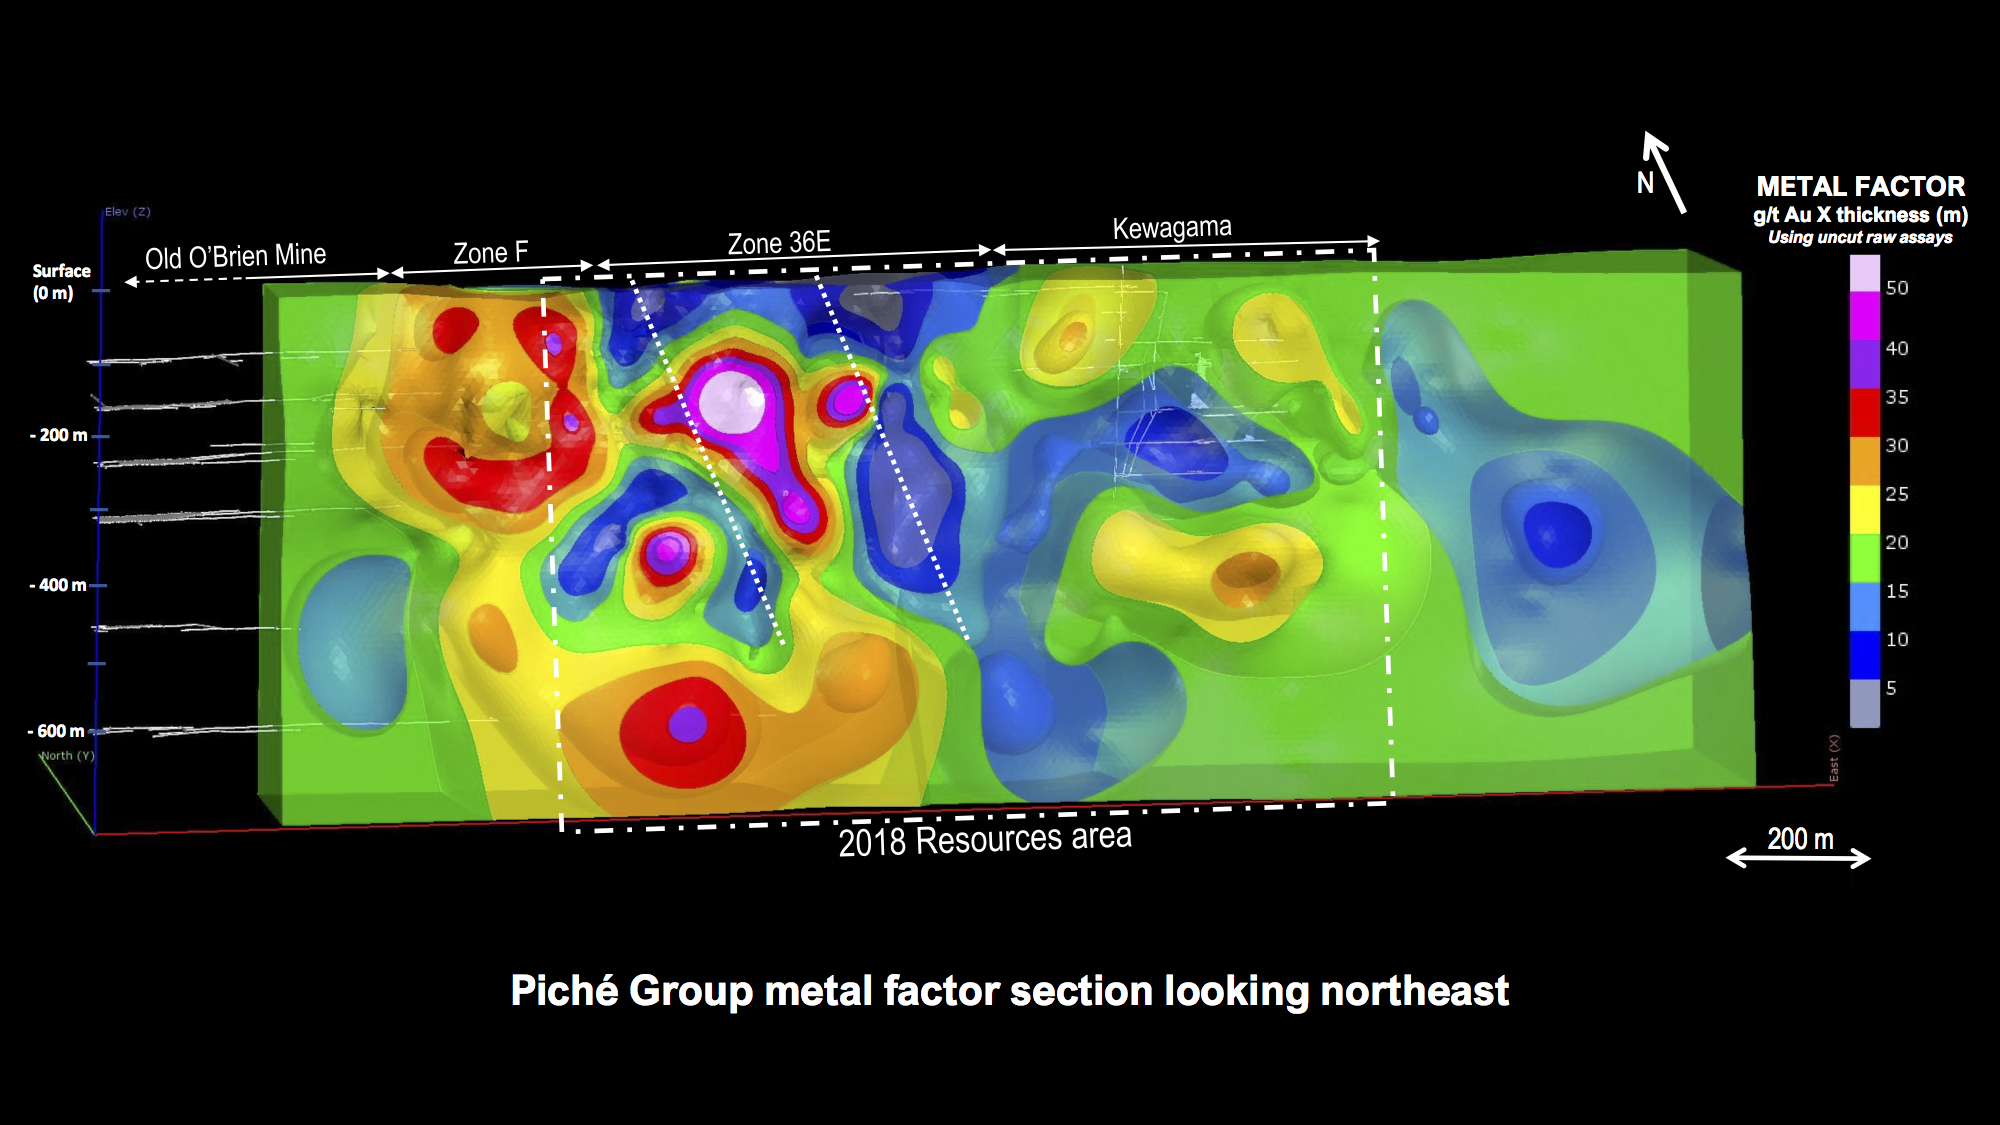 3D metal factor of the Piché Group looking northeast